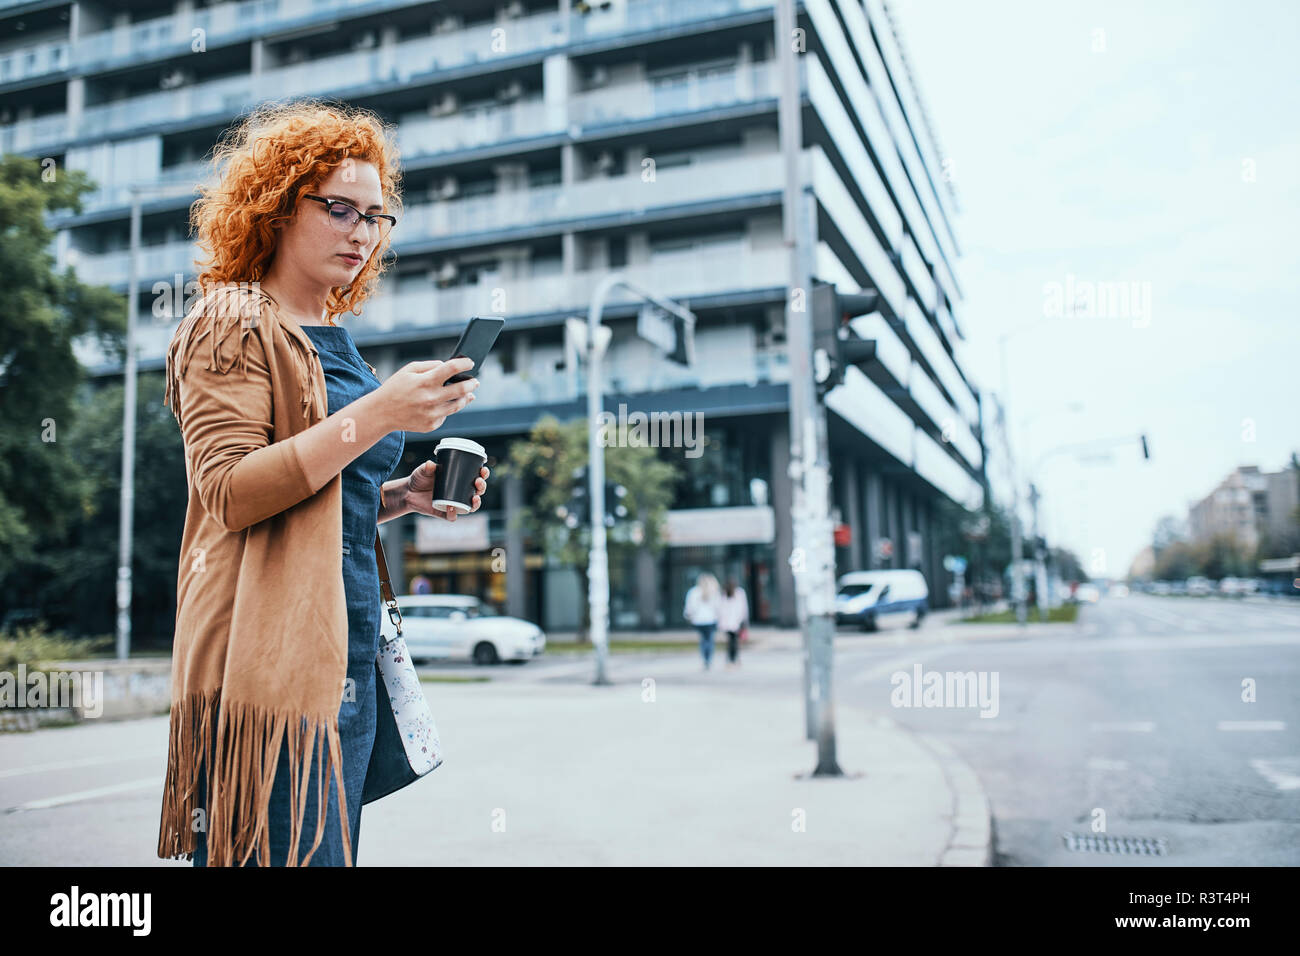 Young woman waiting to cross road, using smartphone Stock Photo